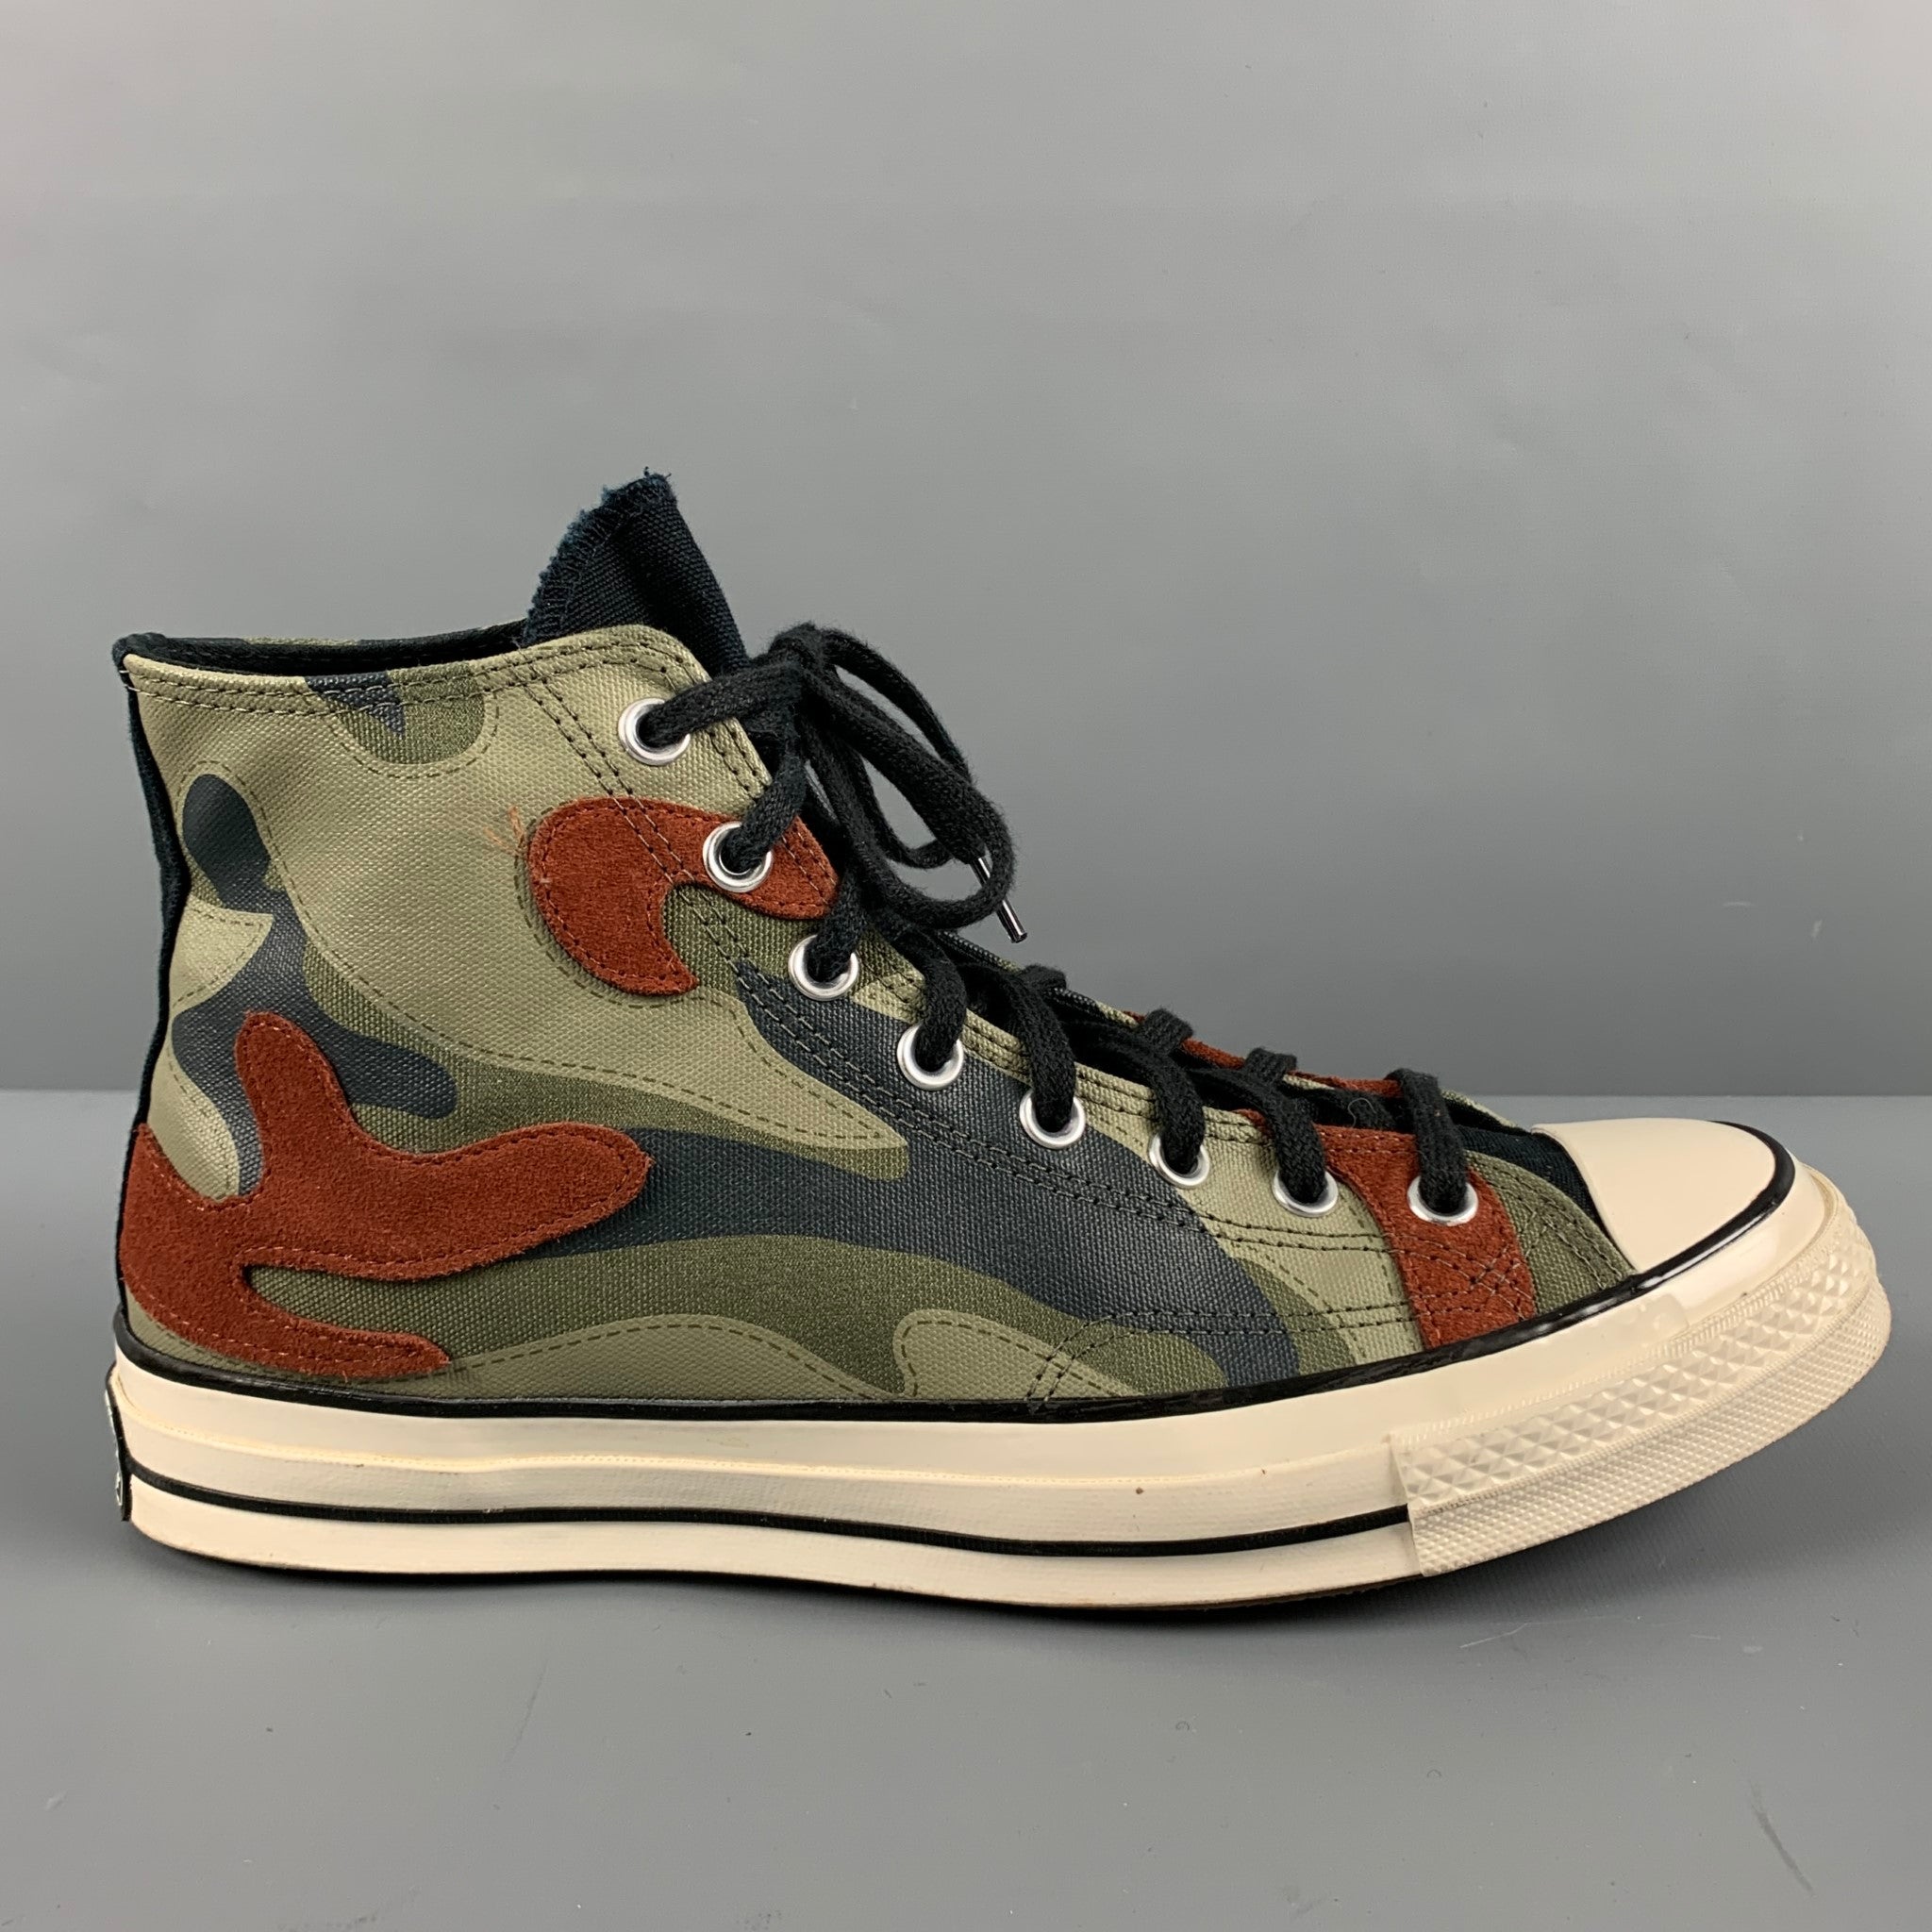 Women's High Top Trainers & Shoes | Converse.com UK